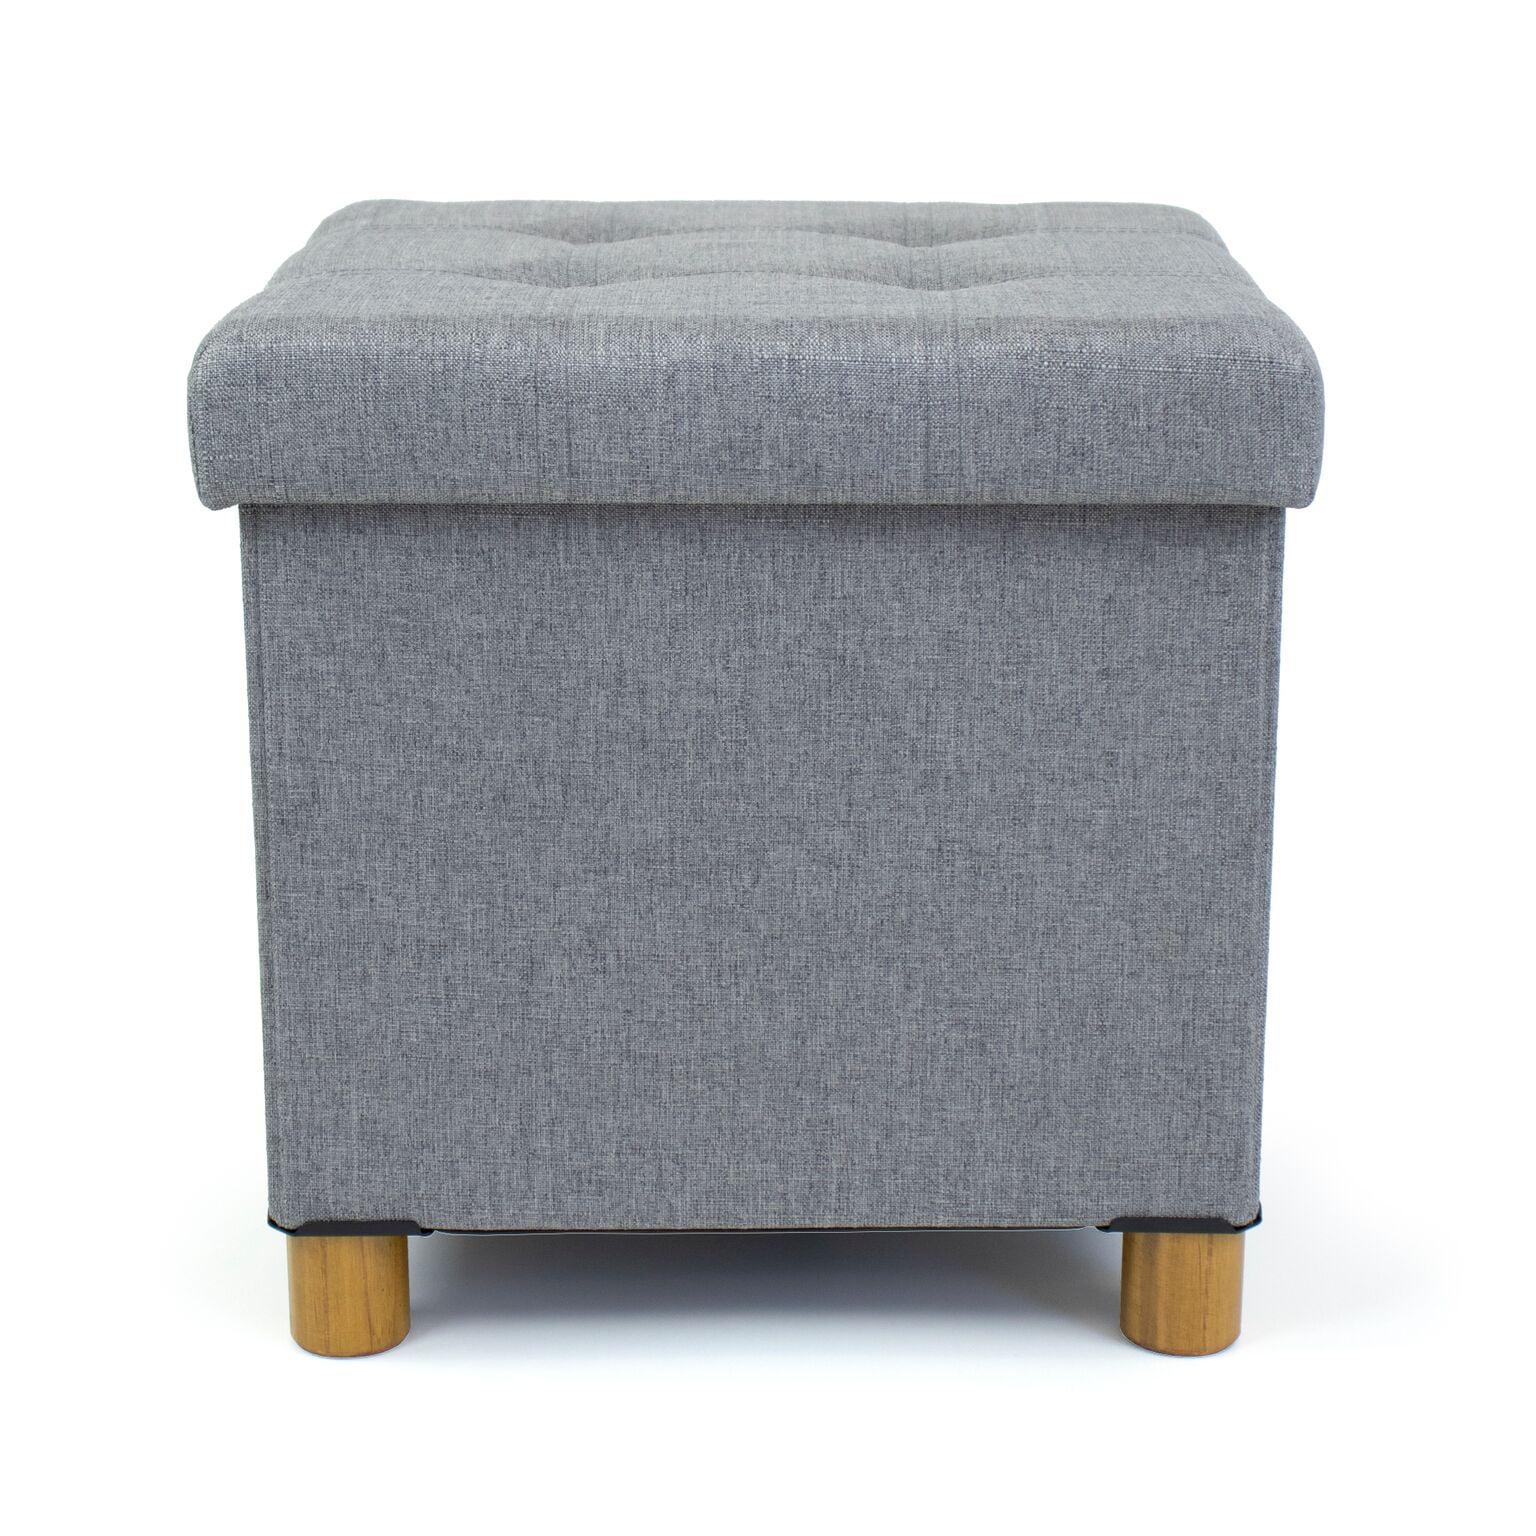 Elegant Grey Collapsible Cube Storage Ottoman with Tray and Tufted Cushion